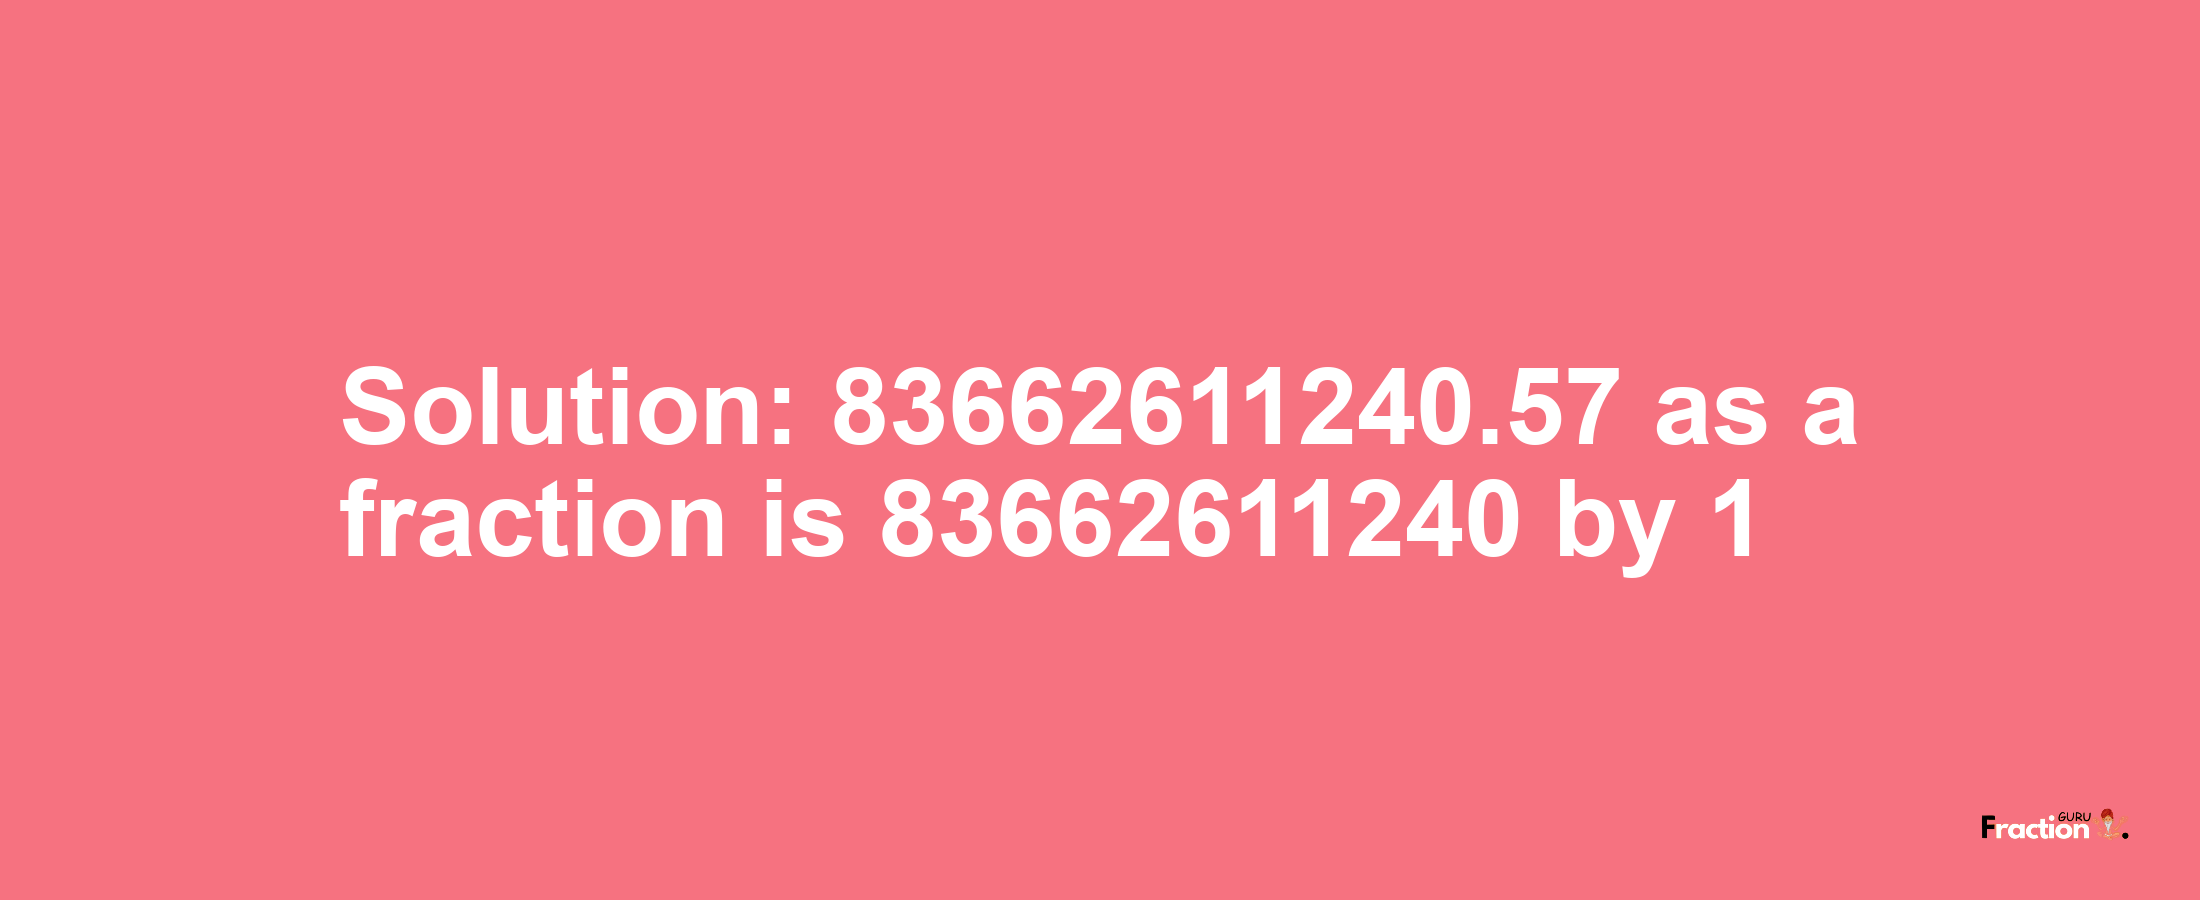 Solution:83662611240.57 as a fraction is 83662611240/1